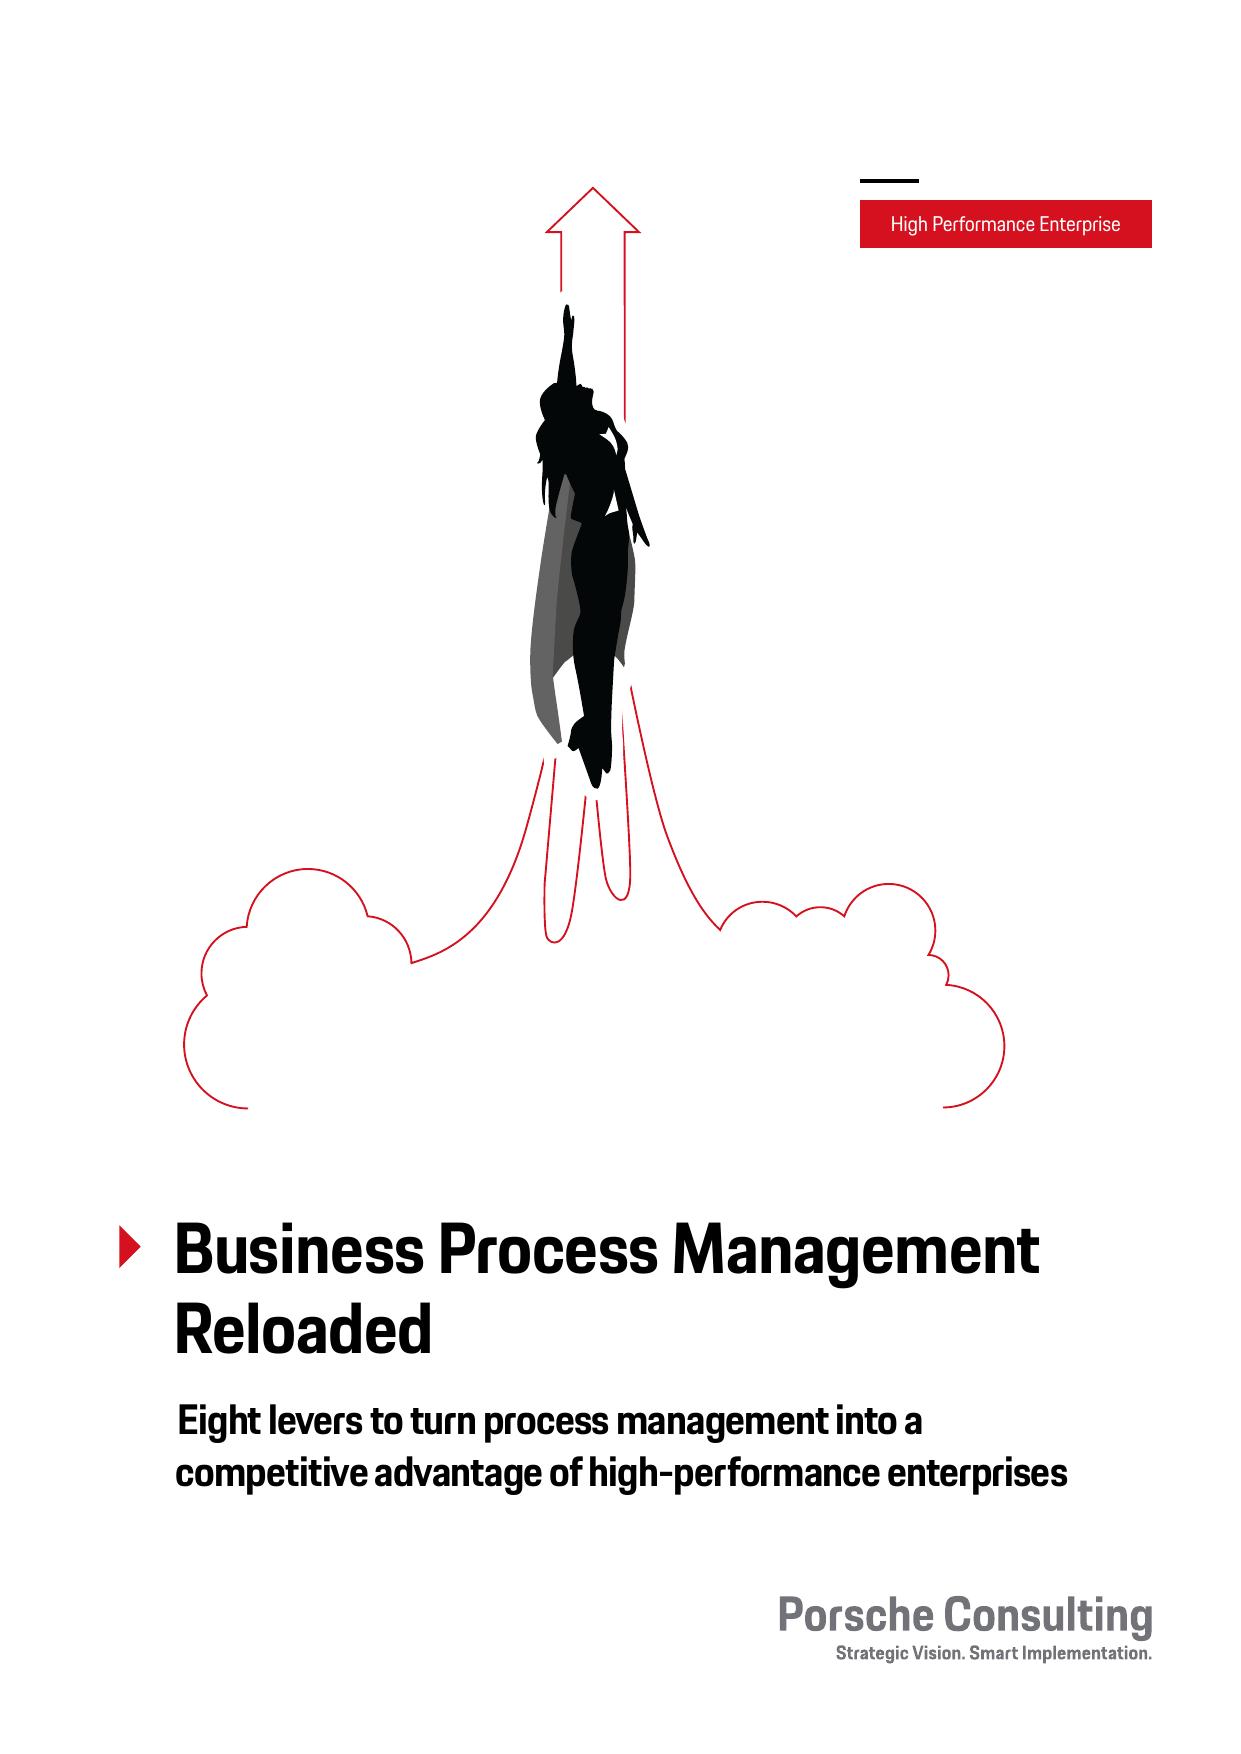 Business Process Management Reloaded - Eight levers to turn PM into a competitive advantage (2019)